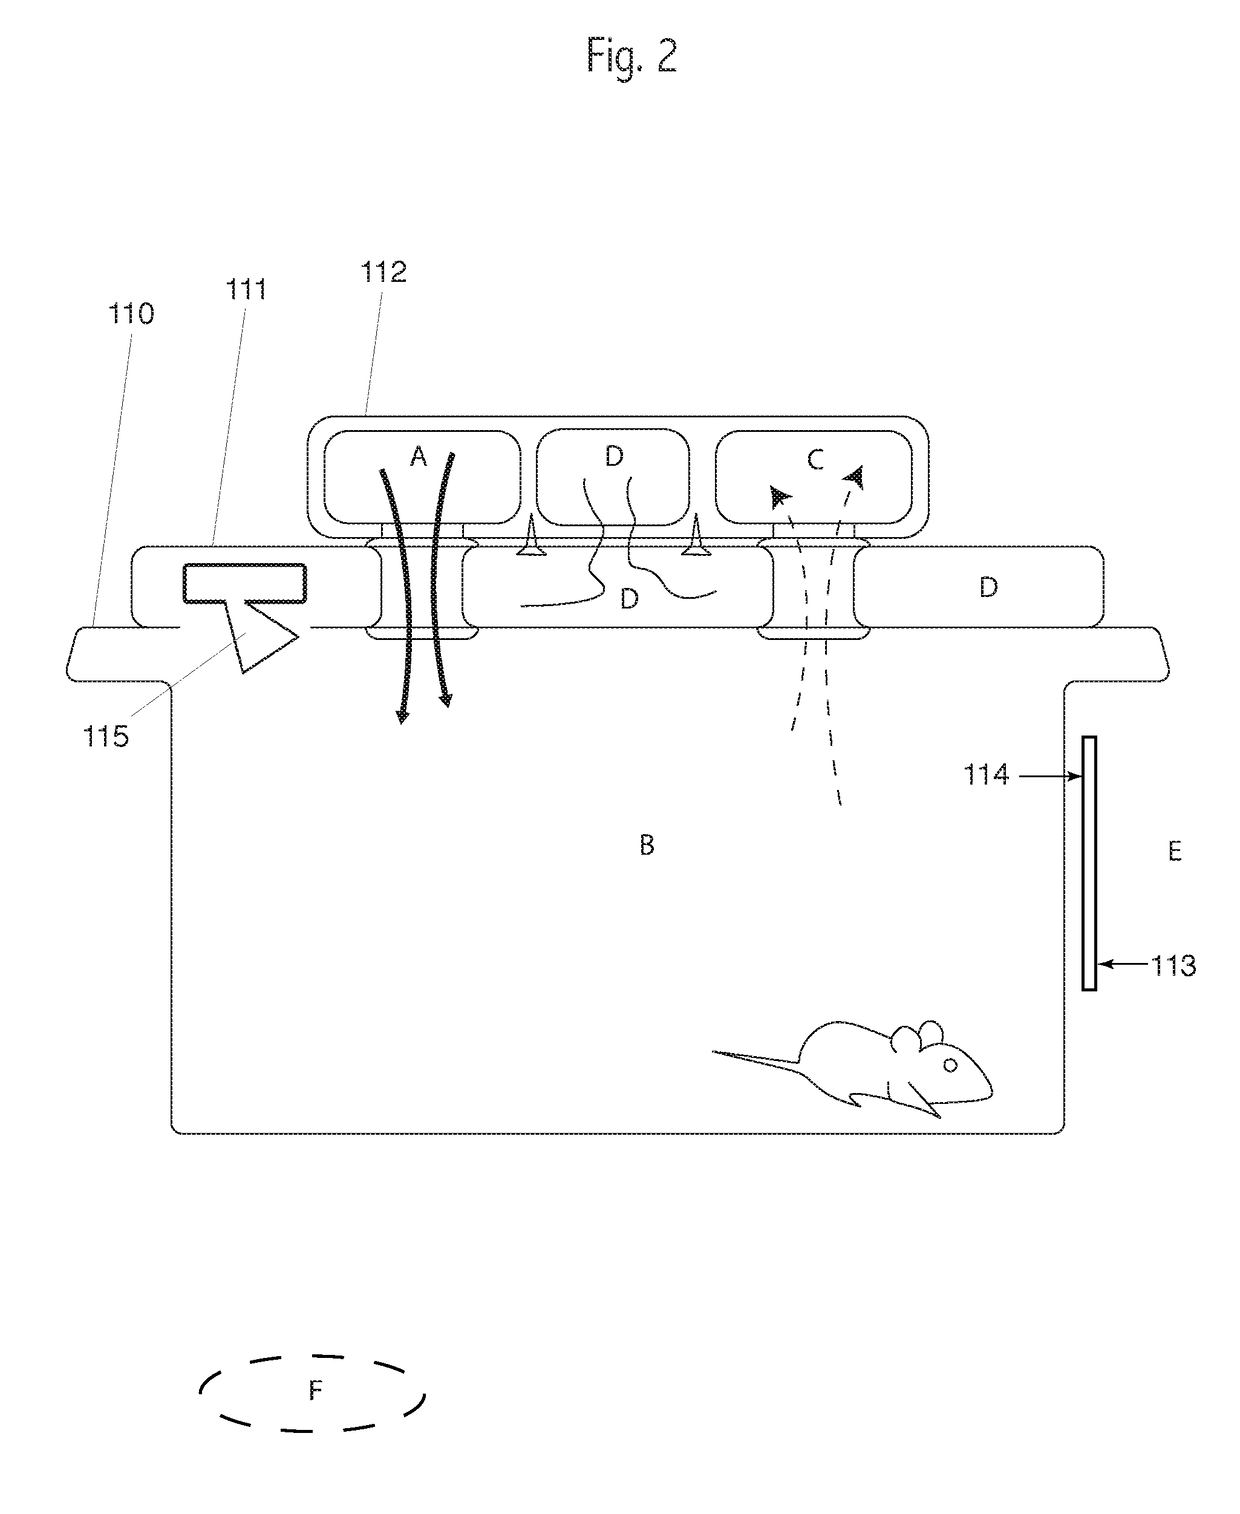 Animal monitoring device and method